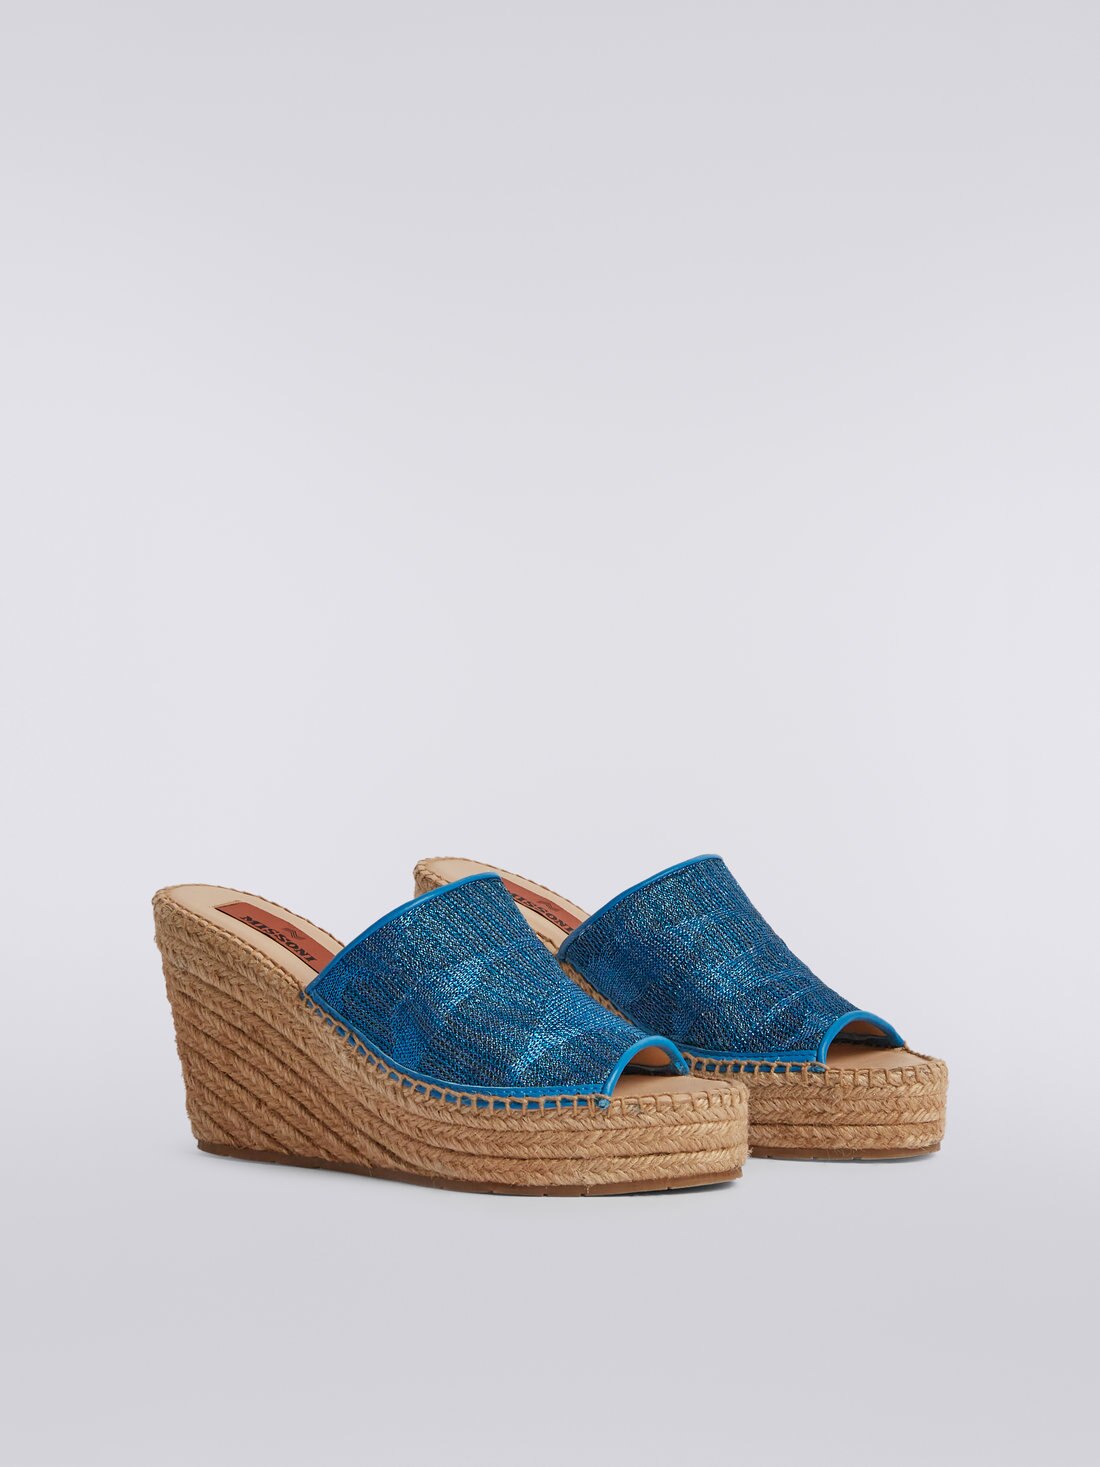 Espadrilles with wedge and chevron knit band, Blue - AS23WY09BT006OS72CY - 1